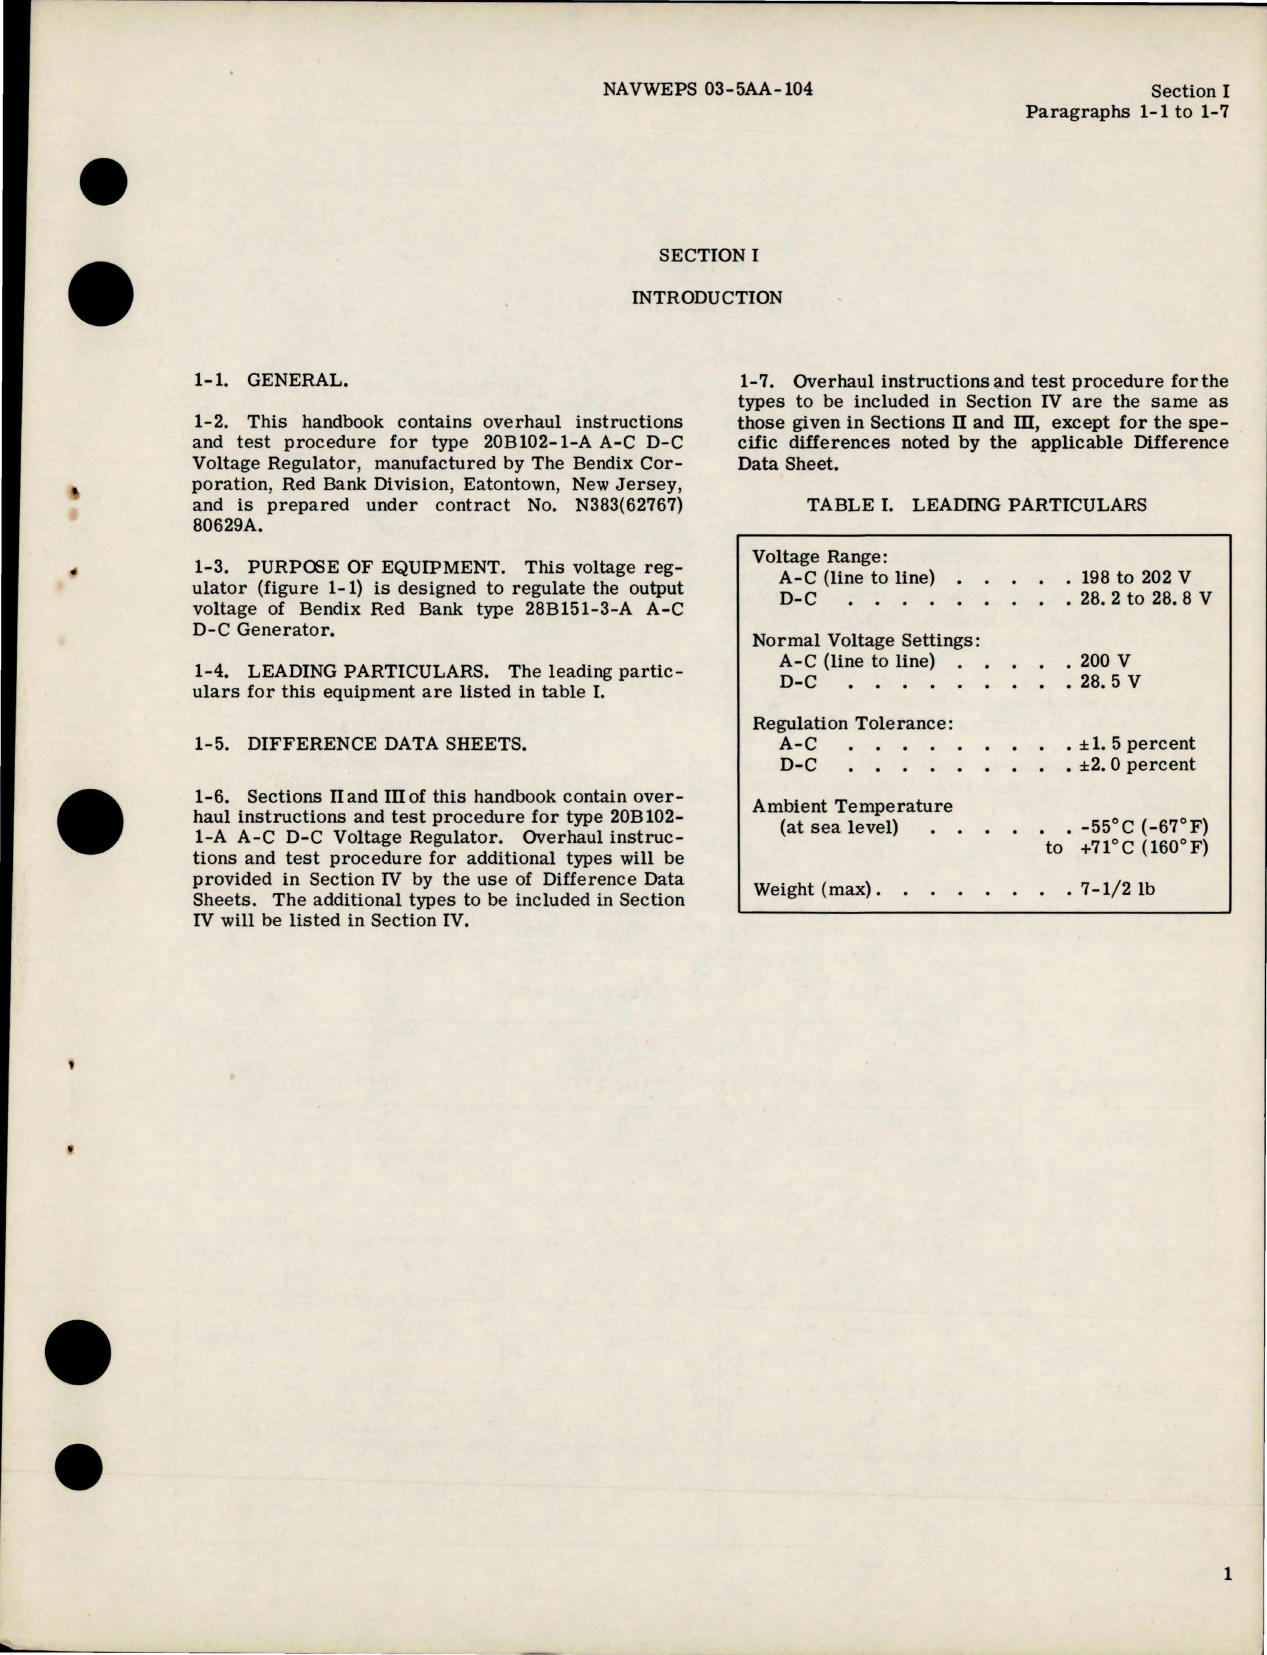 Sample page 5 from AirCorps Library document: Overhaul Instructions for AC DC Voltage Regulator - Type 20B102-1-A 